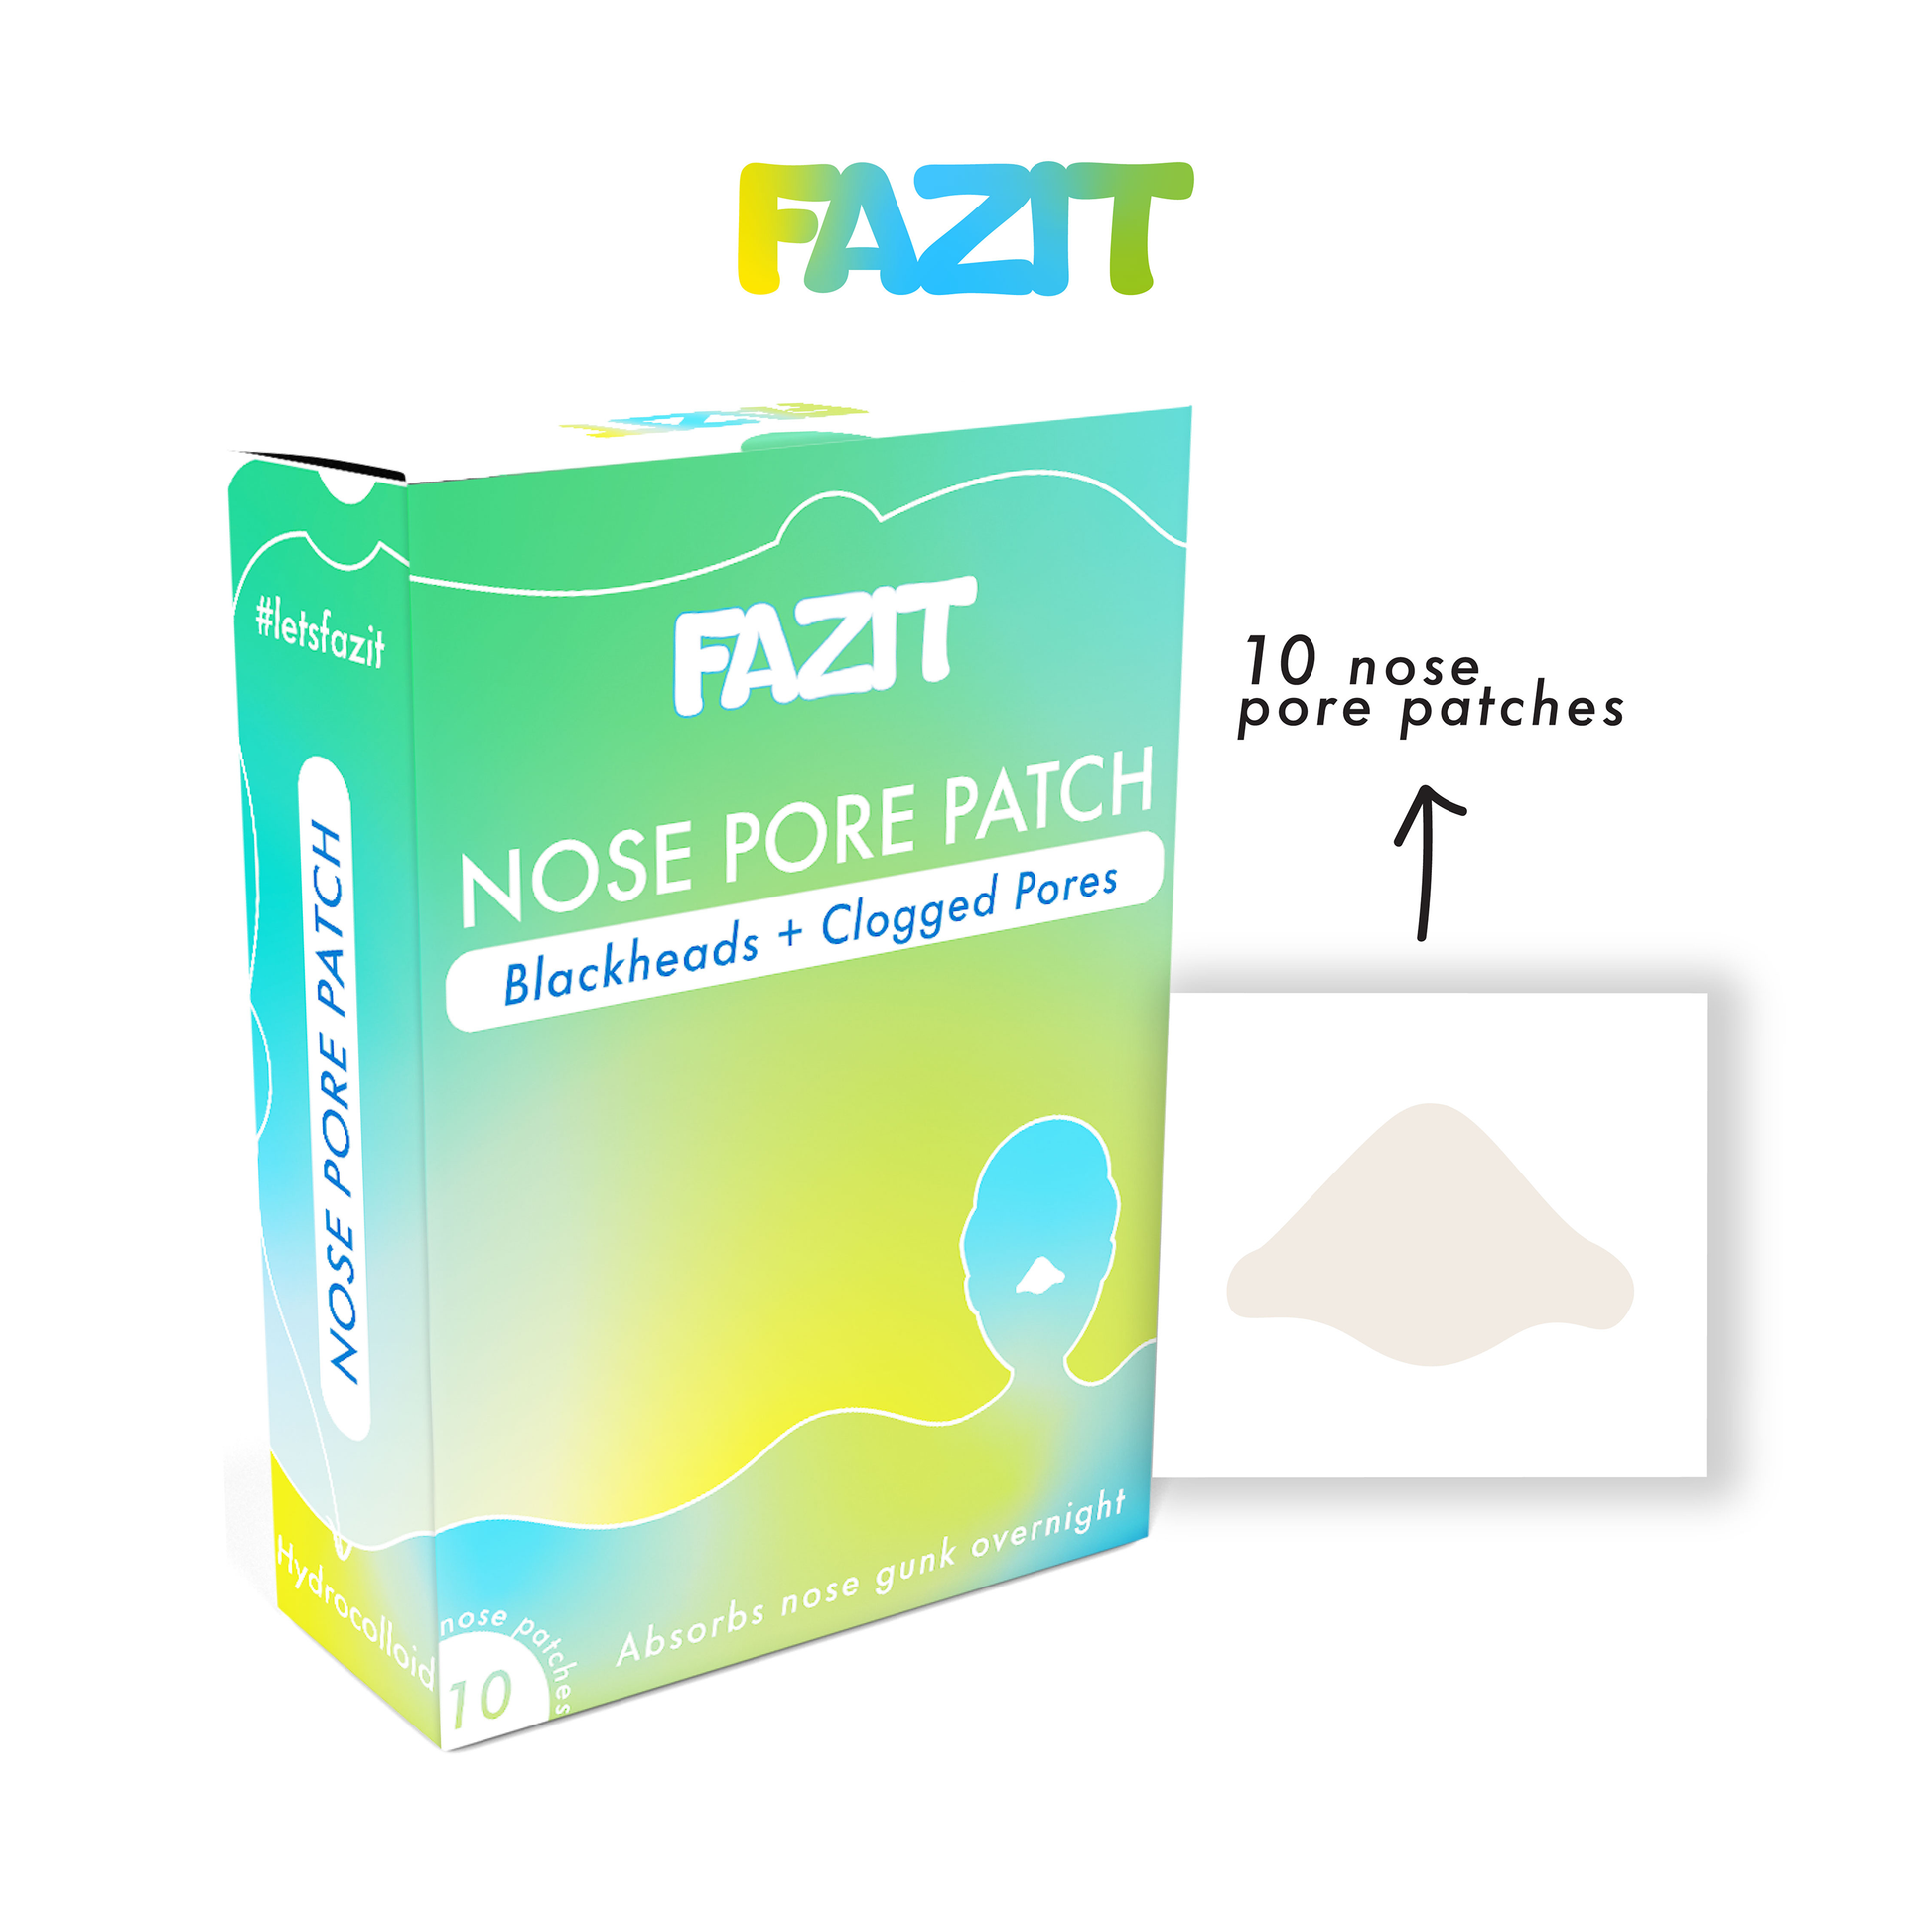 10 nose patches included